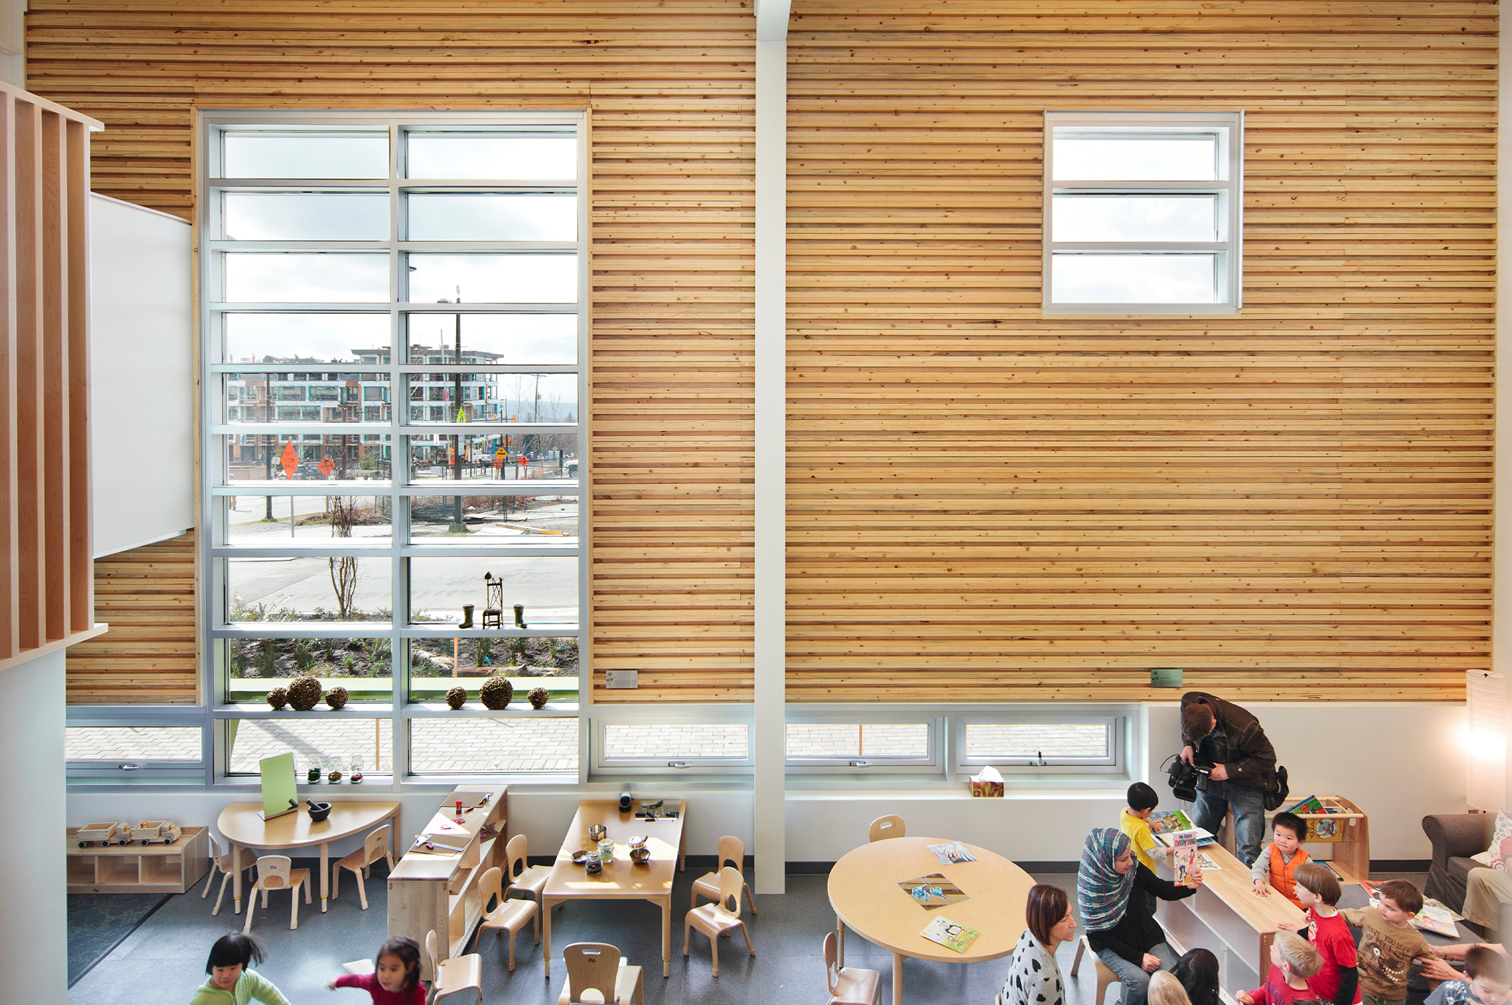 Children in their classroom with high ceilings, a large window and wooden walls.